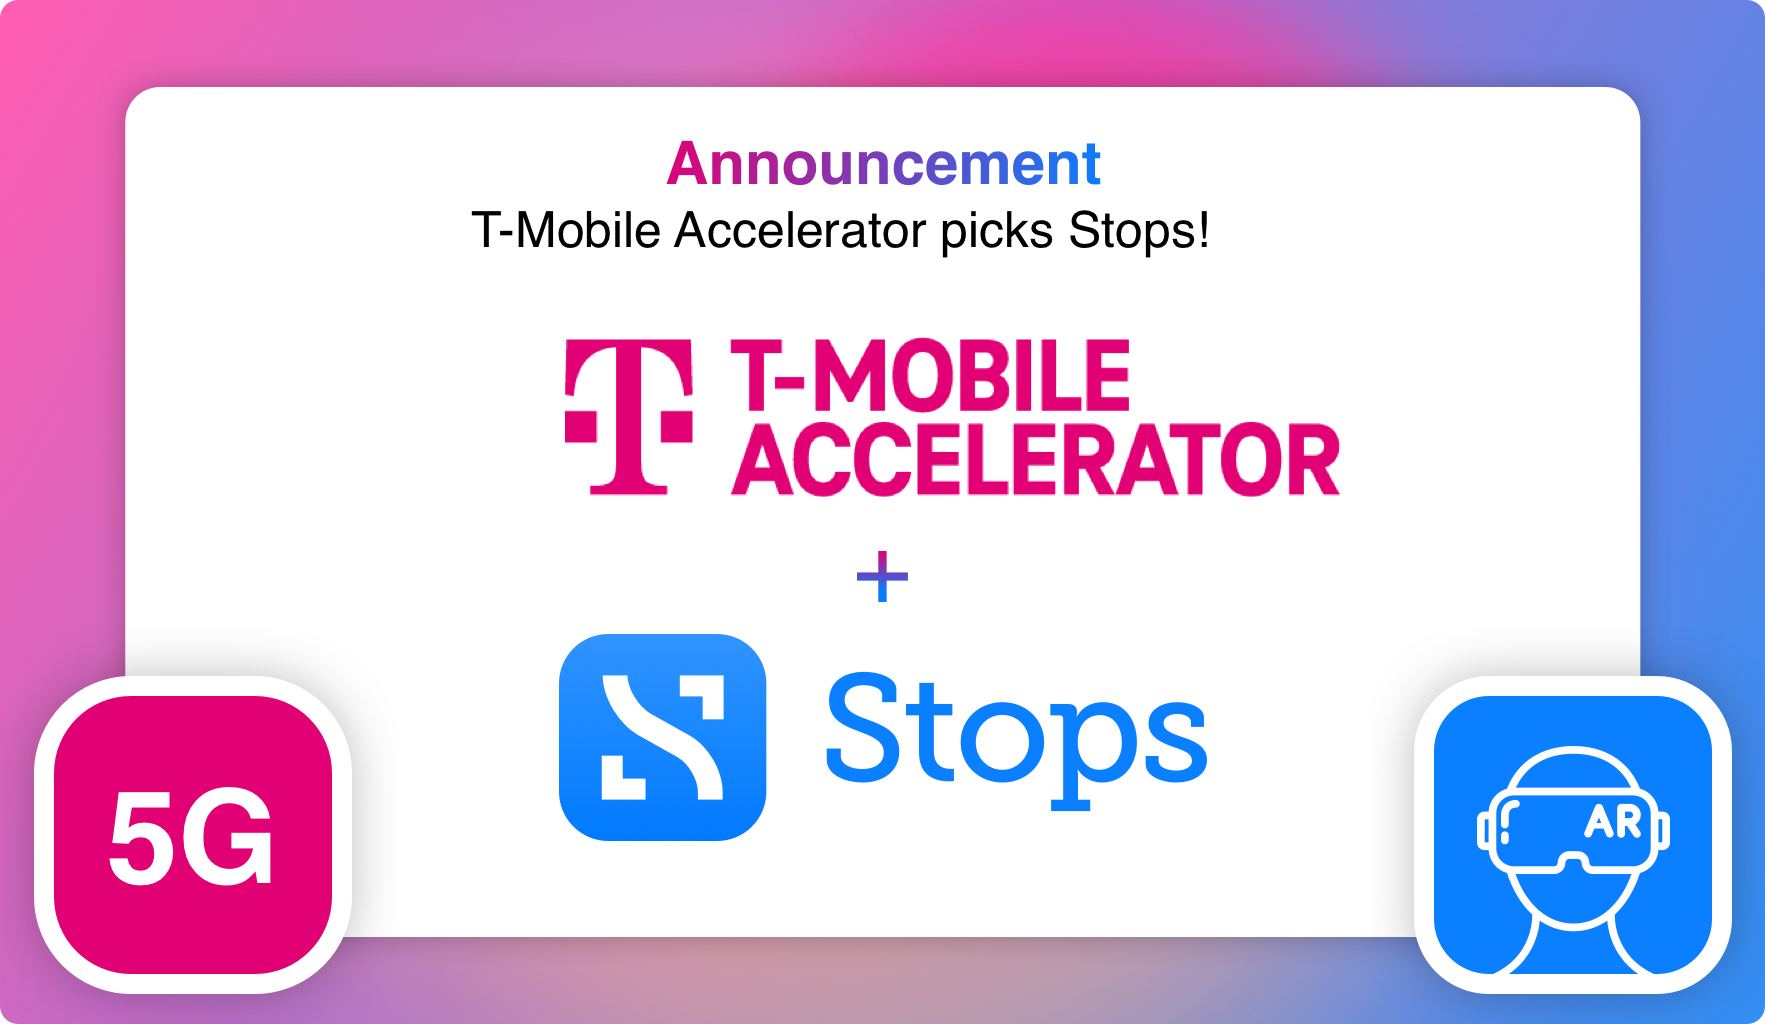 Stops is picked for the T-Mobile Accelerator